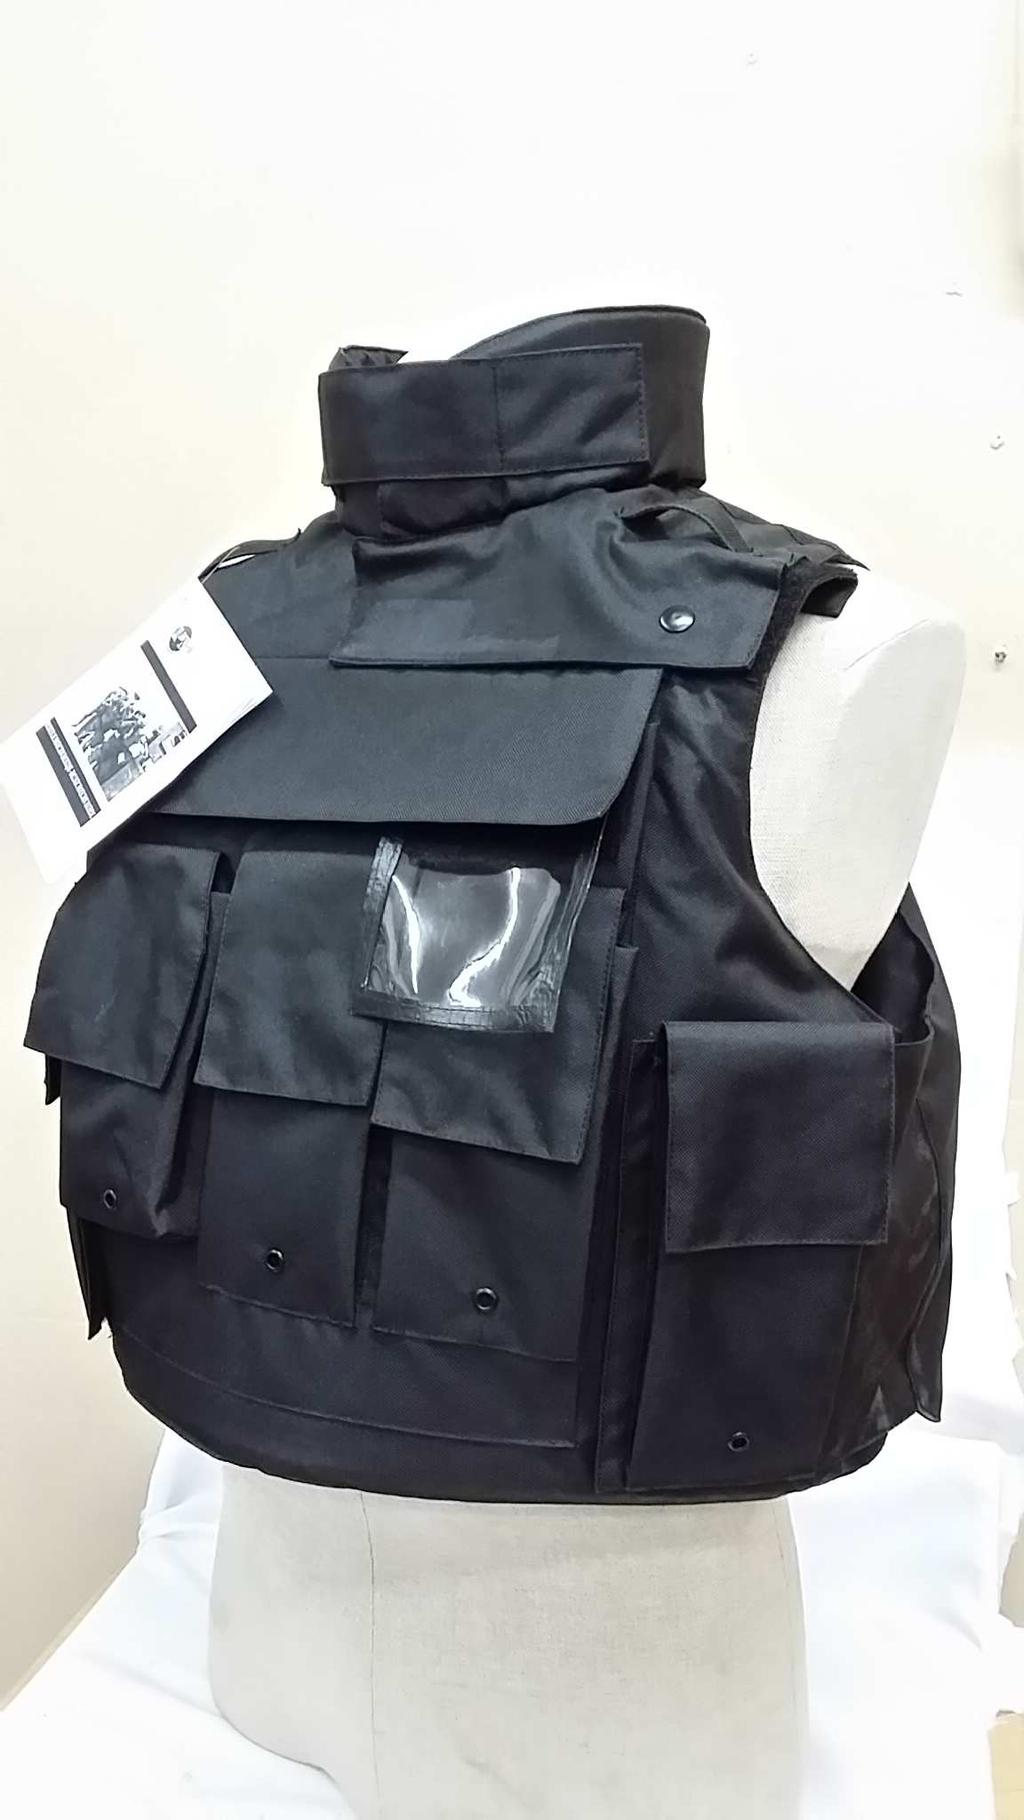 M/ BODY ARMOUR VESTS NIJ PROTECTION: PROTECTION: IIIA-0101,06 357 SIG FMJ FN 125gr,44 Magnum SJHP 240gr FRONT VIEW MATERIAL Tactical 8204V3 Bodyarmour Oxford 600 Denier *Soft panels with large